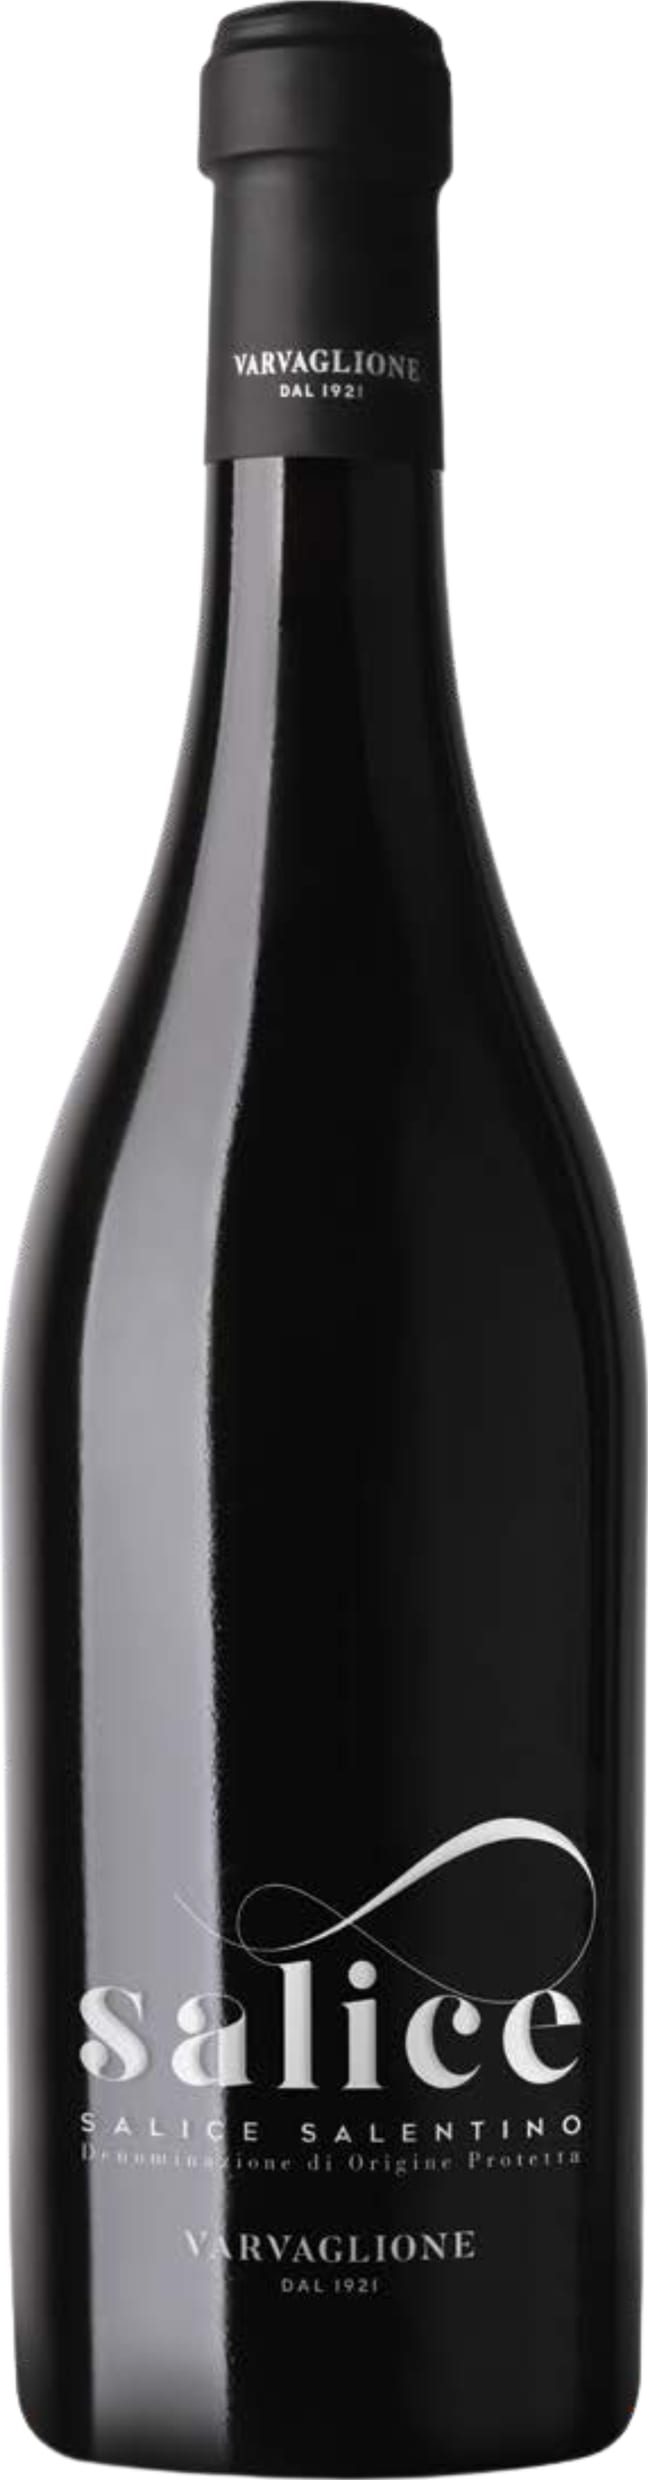 Varvaglione Salice Salentino 2021 75cl - Buy Varvaglione Wines from GREAT WINES DIRECT wine shop